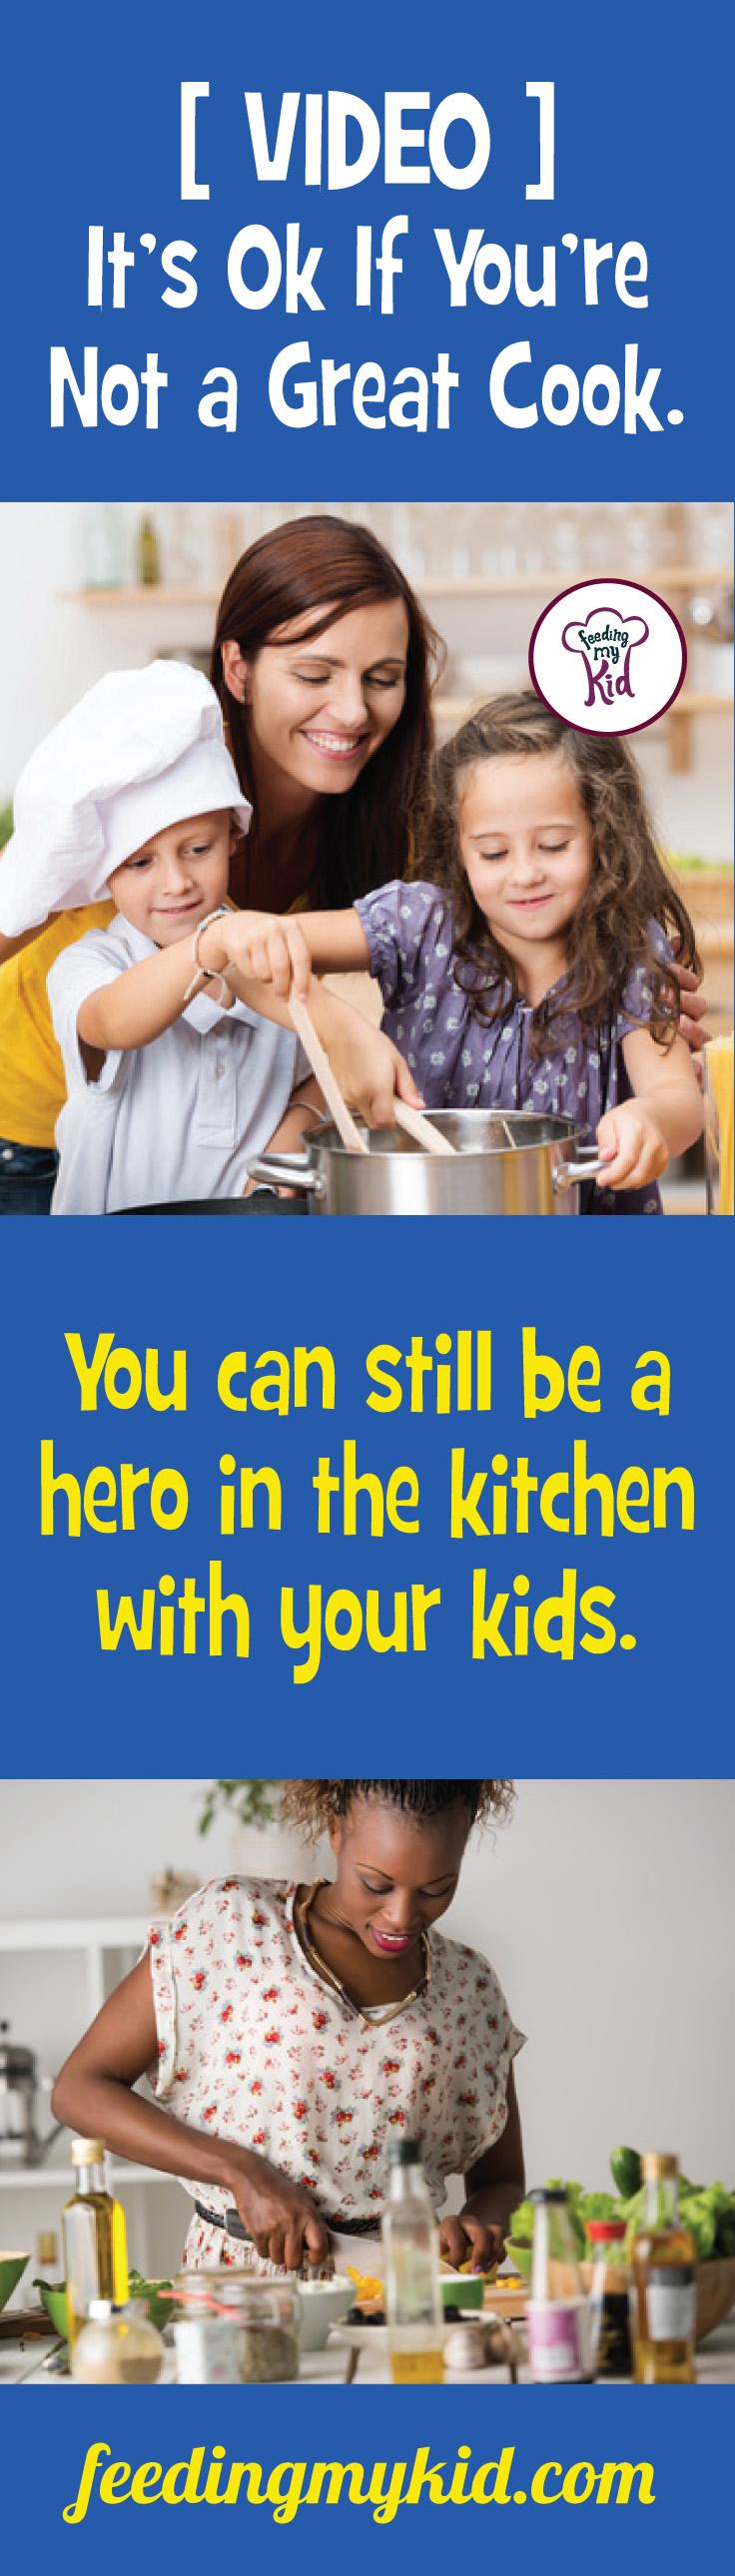 It's Ok If You're Not a Great Cook. You can still be a hero in the kitchen with your kids.